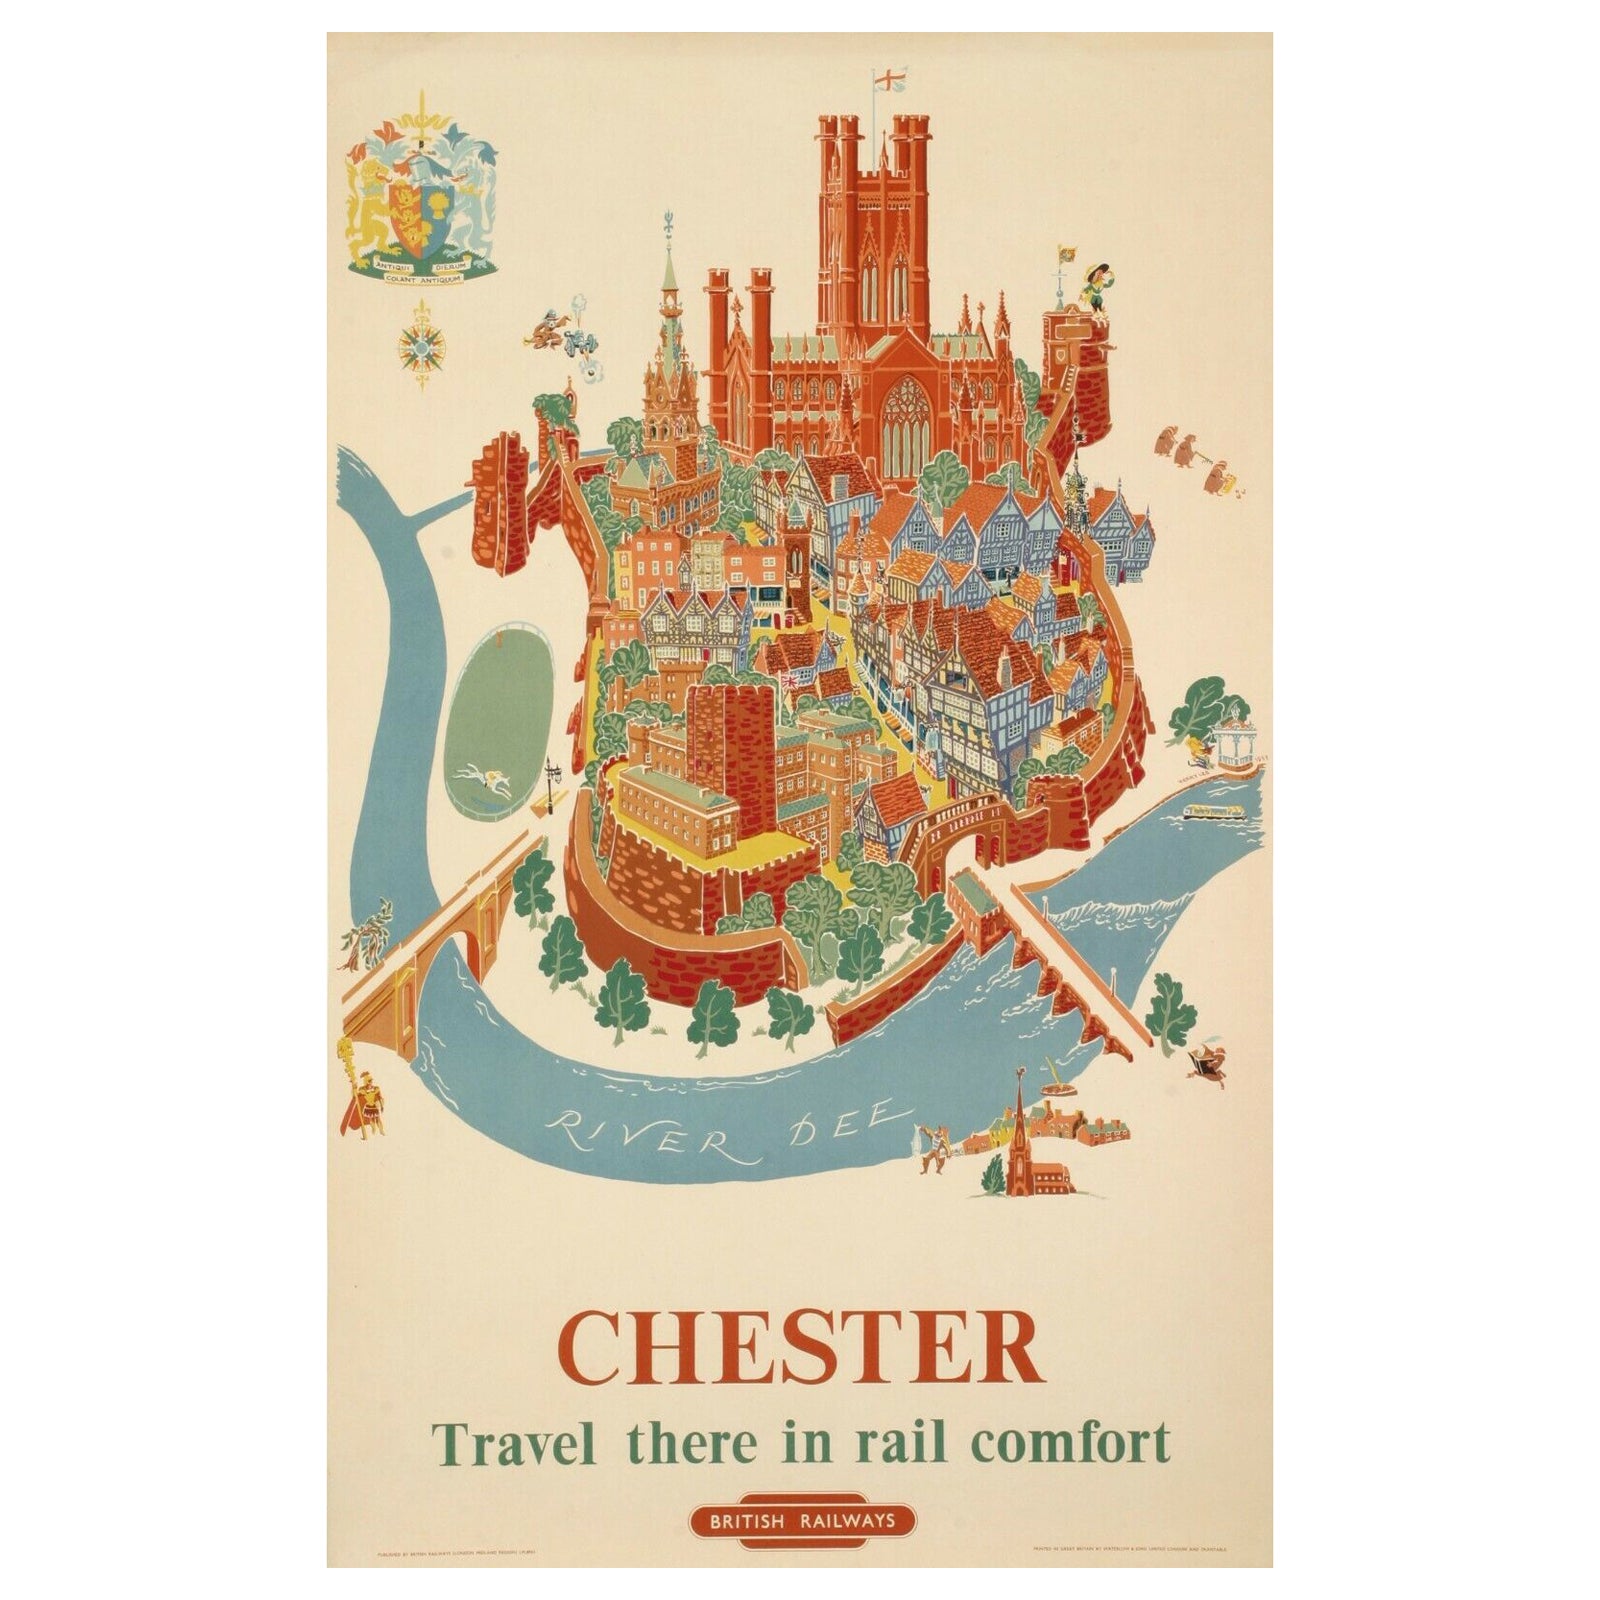 Original Vintage Poster-Lee Kerry-chester-angleterre-pays De Galles, 1953 For Sale